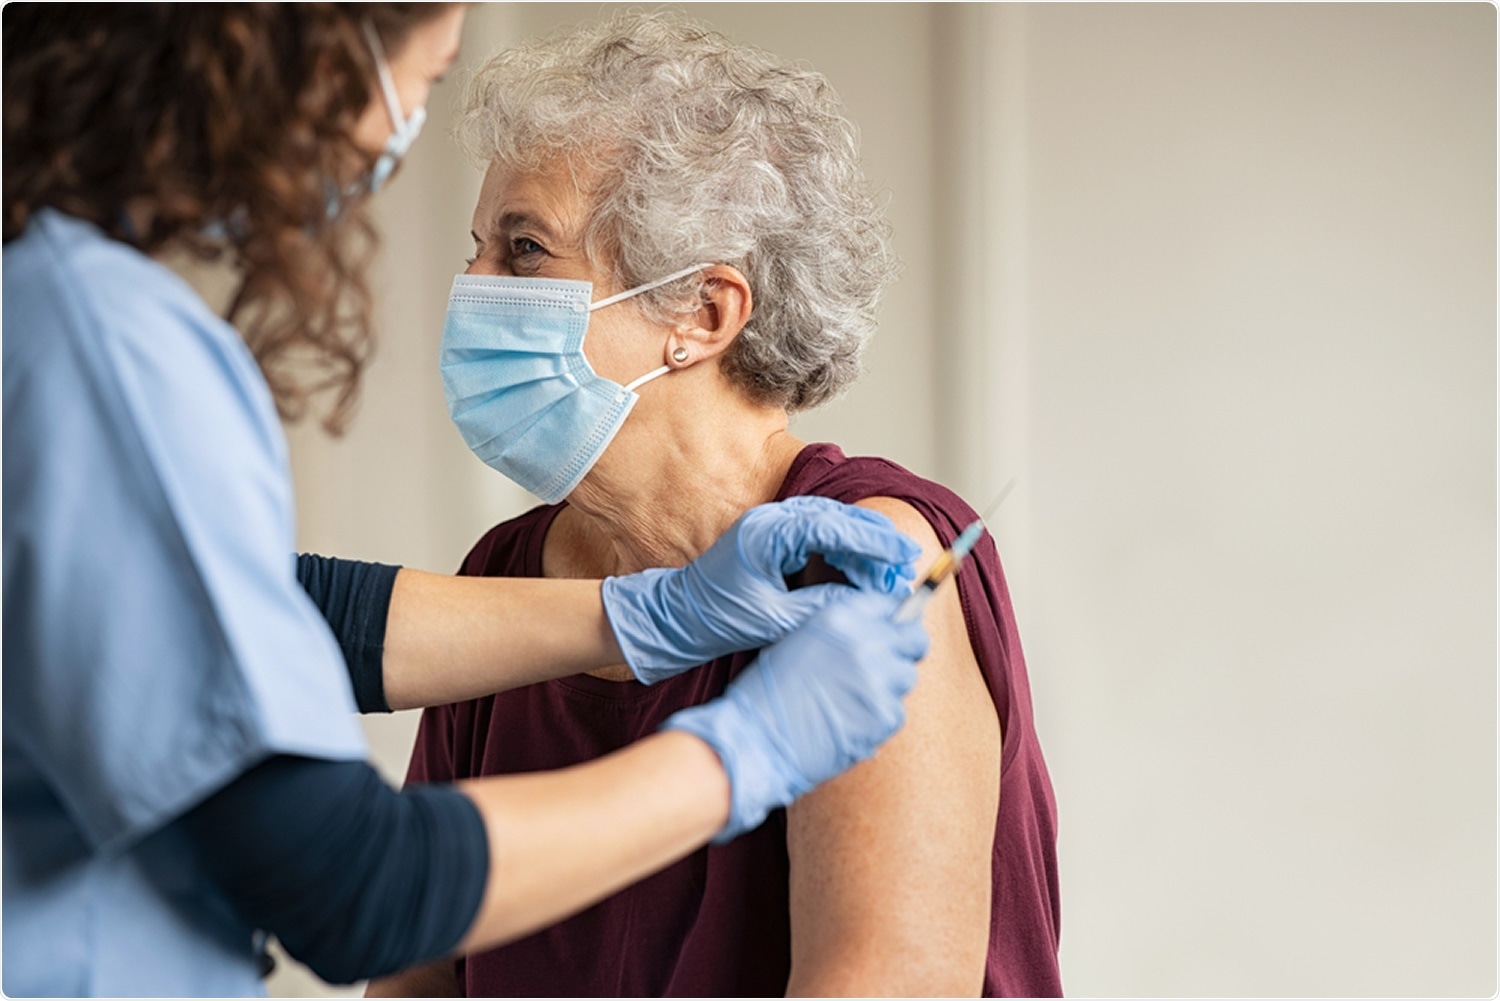 Study: Effectiveness of mRNA BNT162b2 COVID-19 vaccine up to 6 months in a large integrated health system in the USA: a retrospective cohort study. Image Credit: Rido / Shutterstock